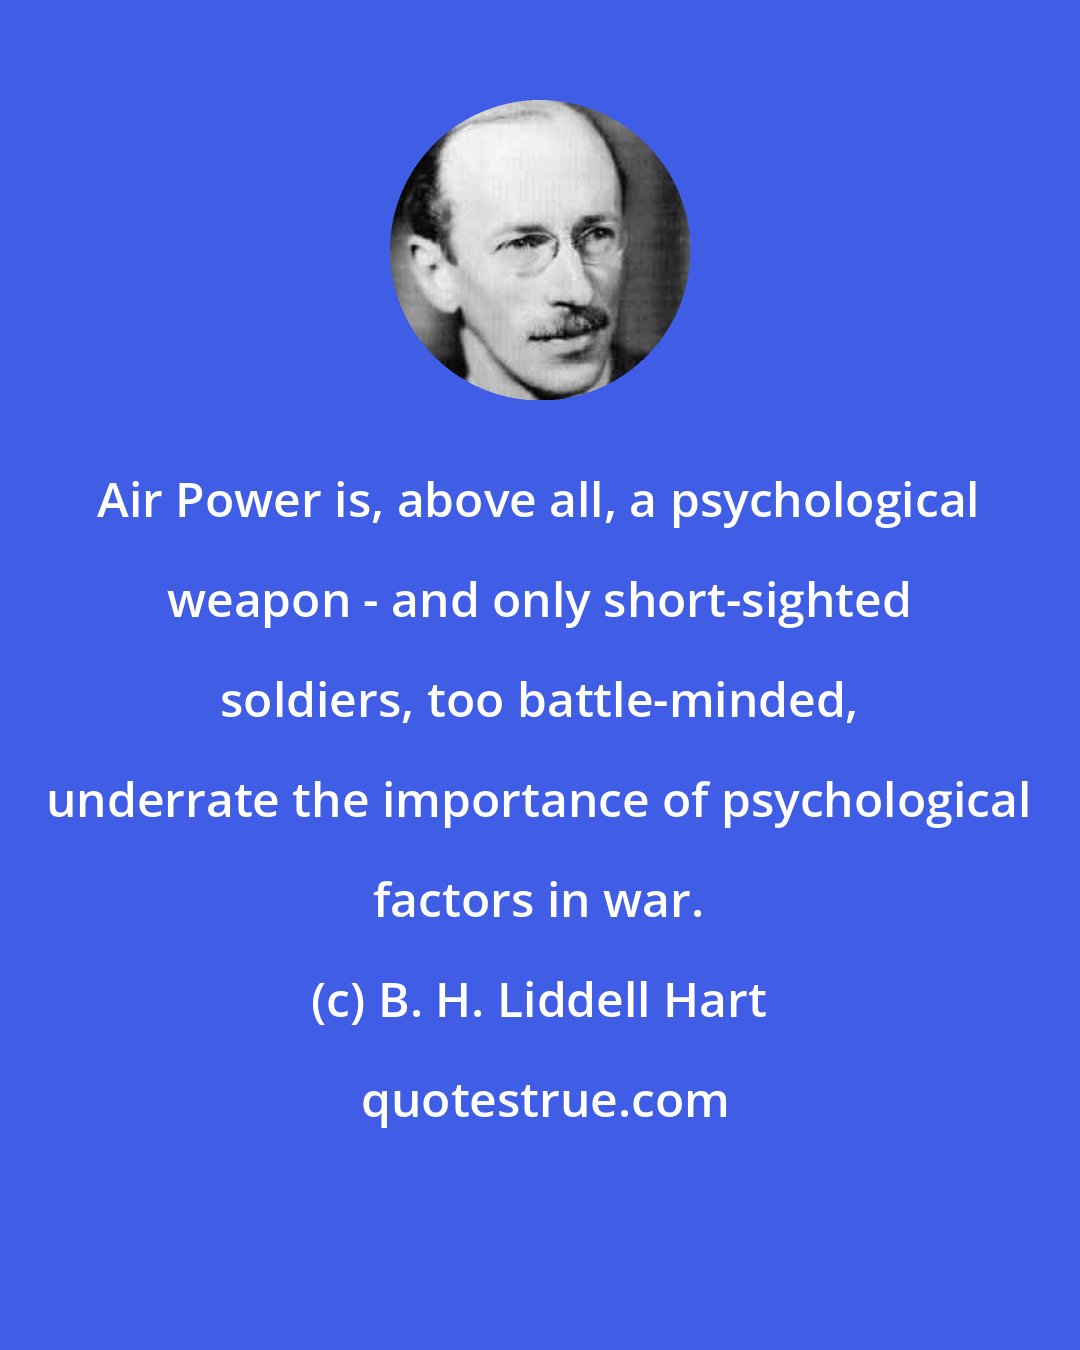 B. H. Liddell Hart: Air Power is, above all, a psychological weapon - and only short-sighted soldiers, too battle-minded, underrate the importance of psychological factors in war.